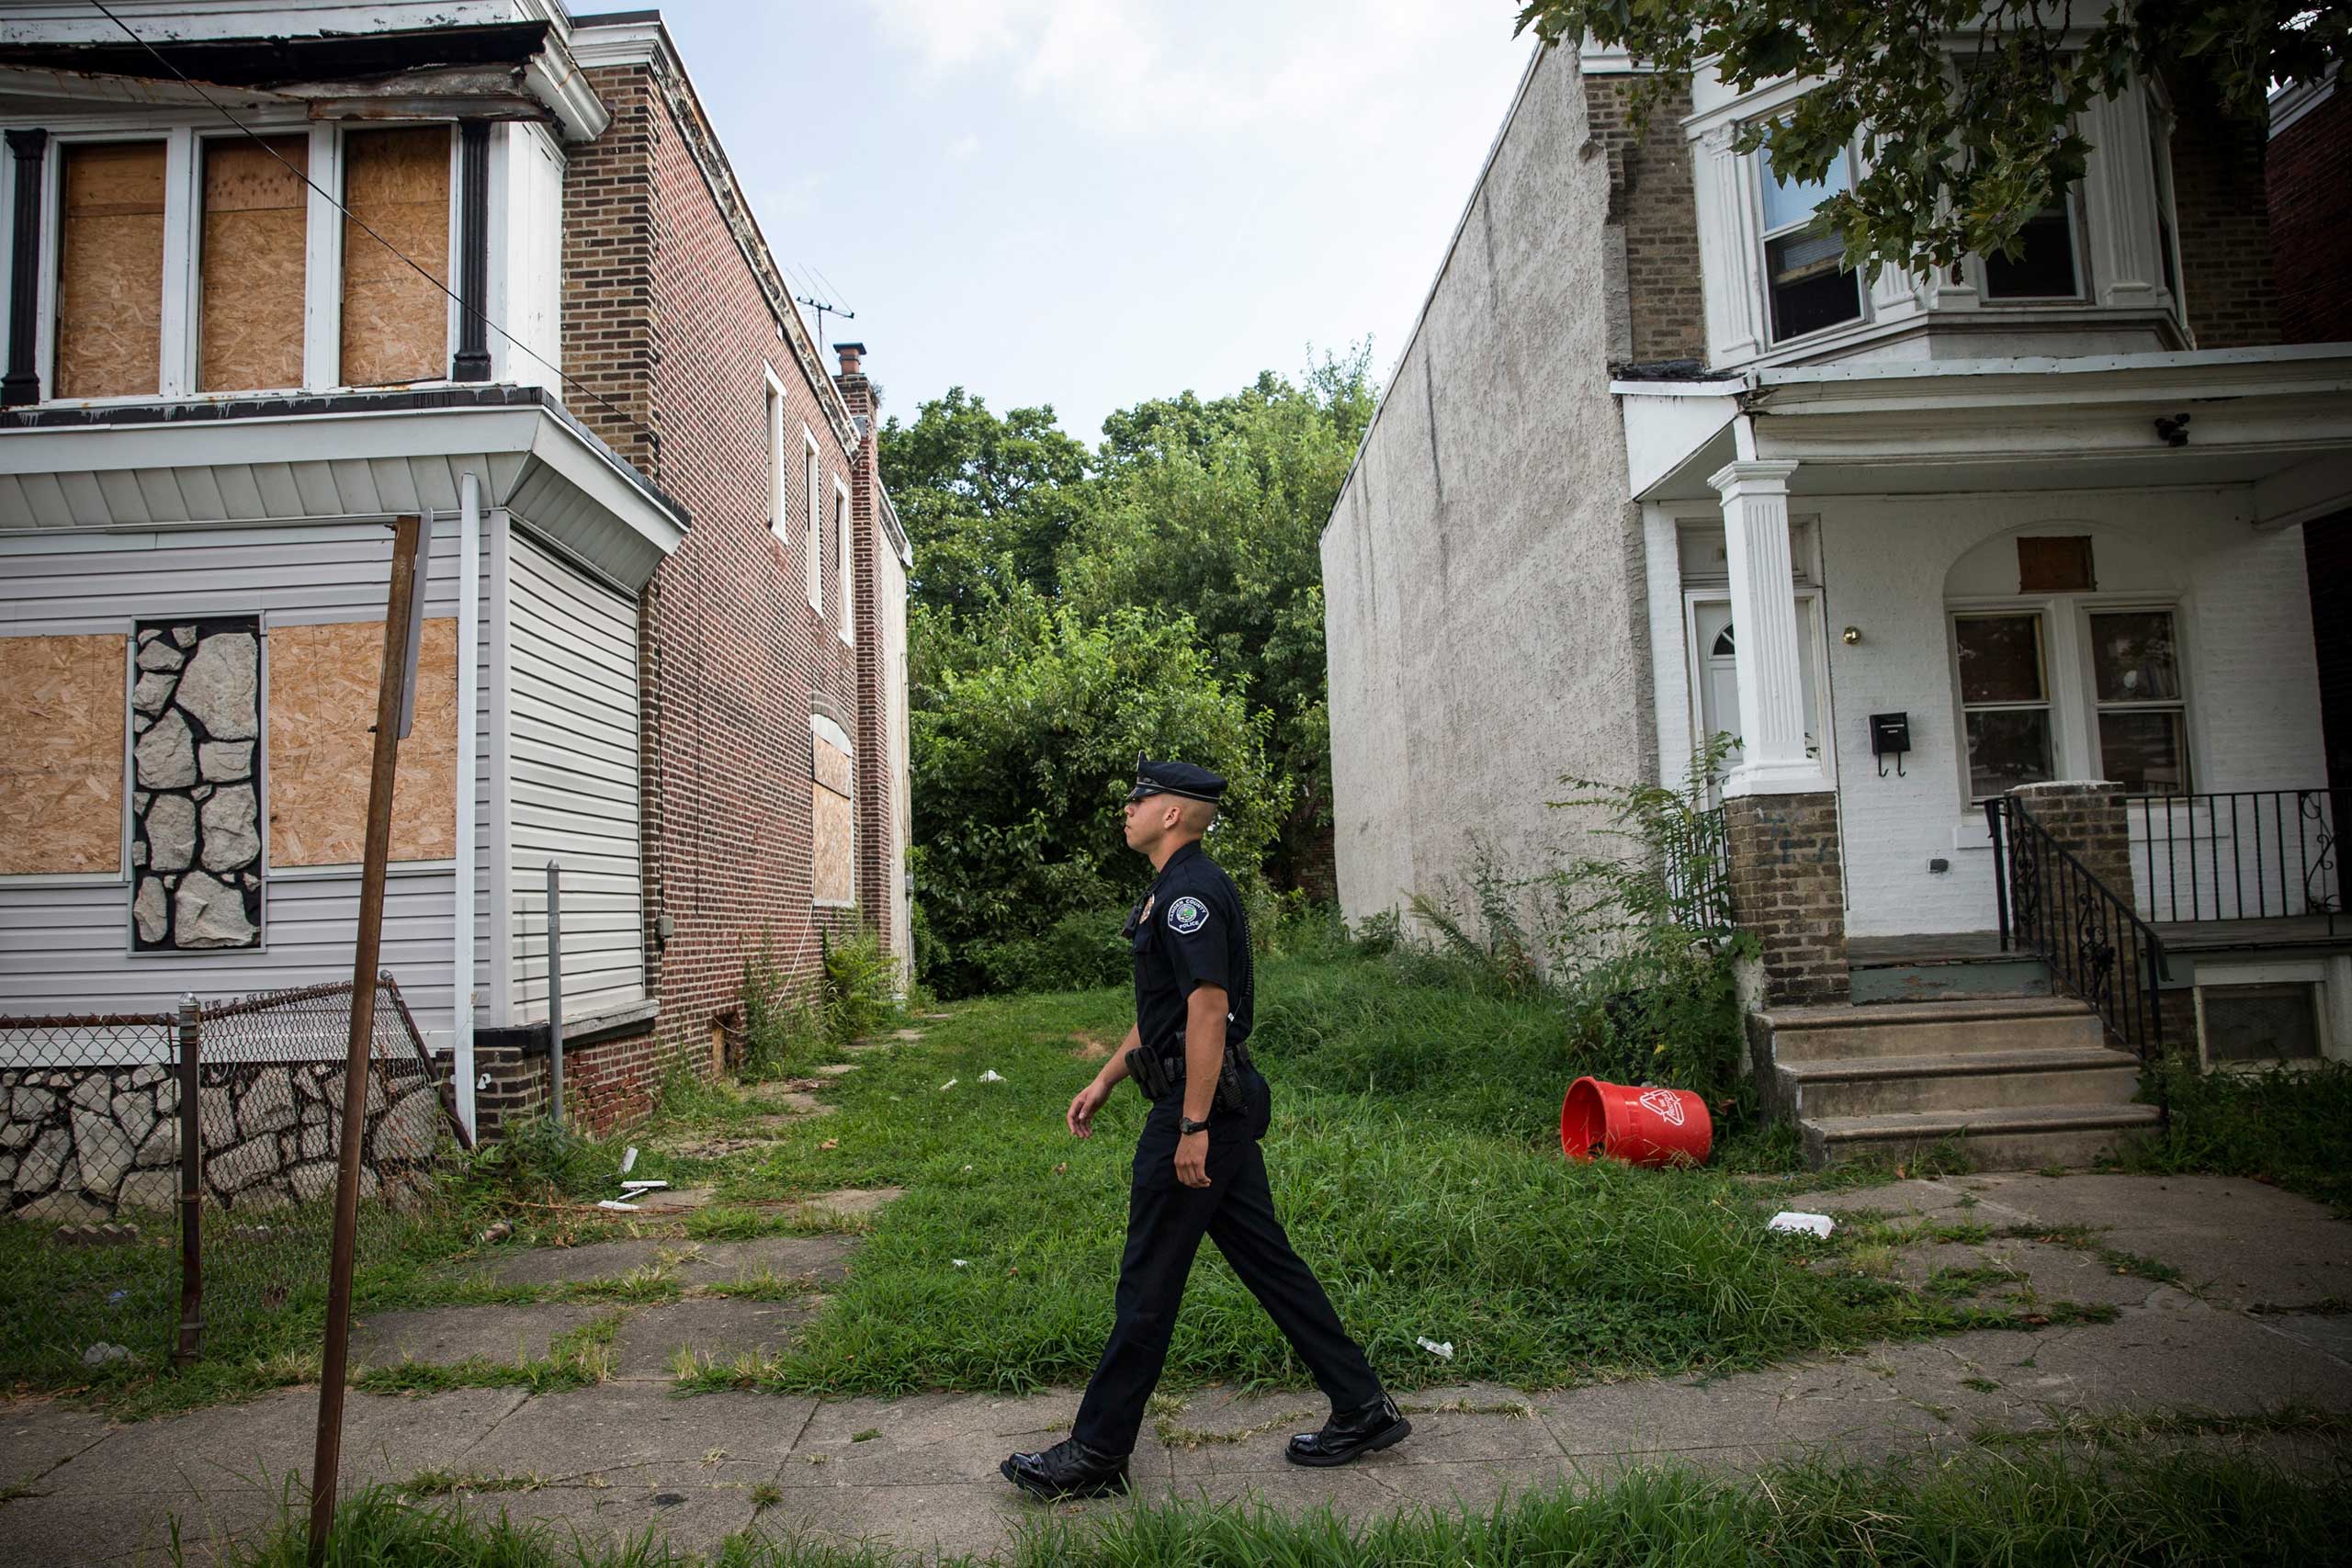 Officer Adam Fulmore, of the Camden County Police Department, goes on a foot patrol in the Parkside neighborhood of Camden, N.J. on Aug. 22, 2013. (Andrew Burton—Getty Images)